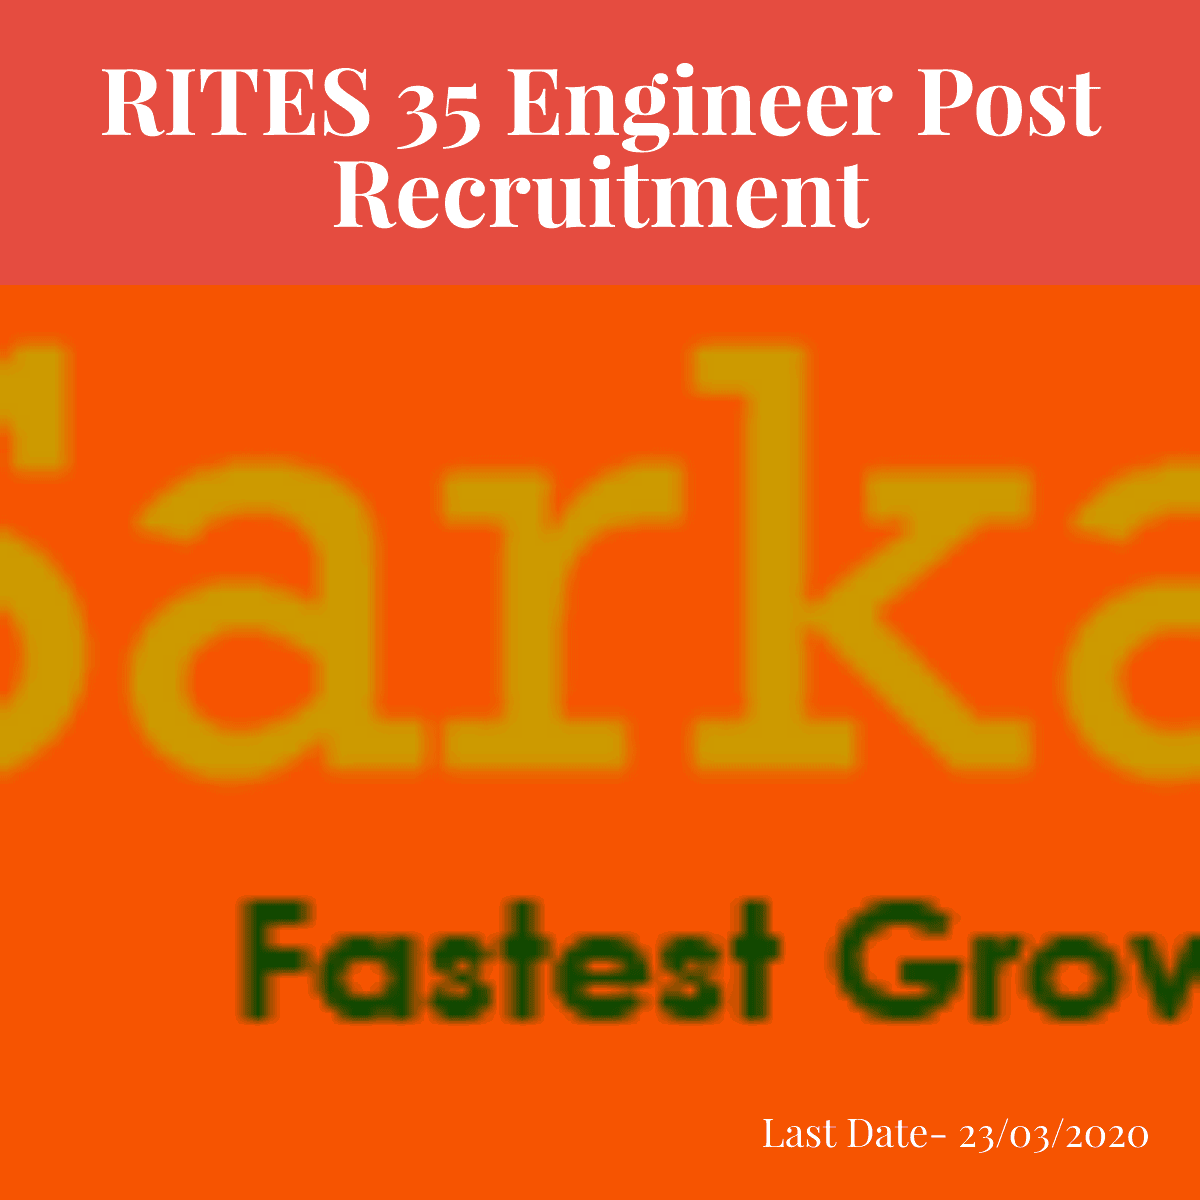 RITES Recruitment 2020 For Engineer Post